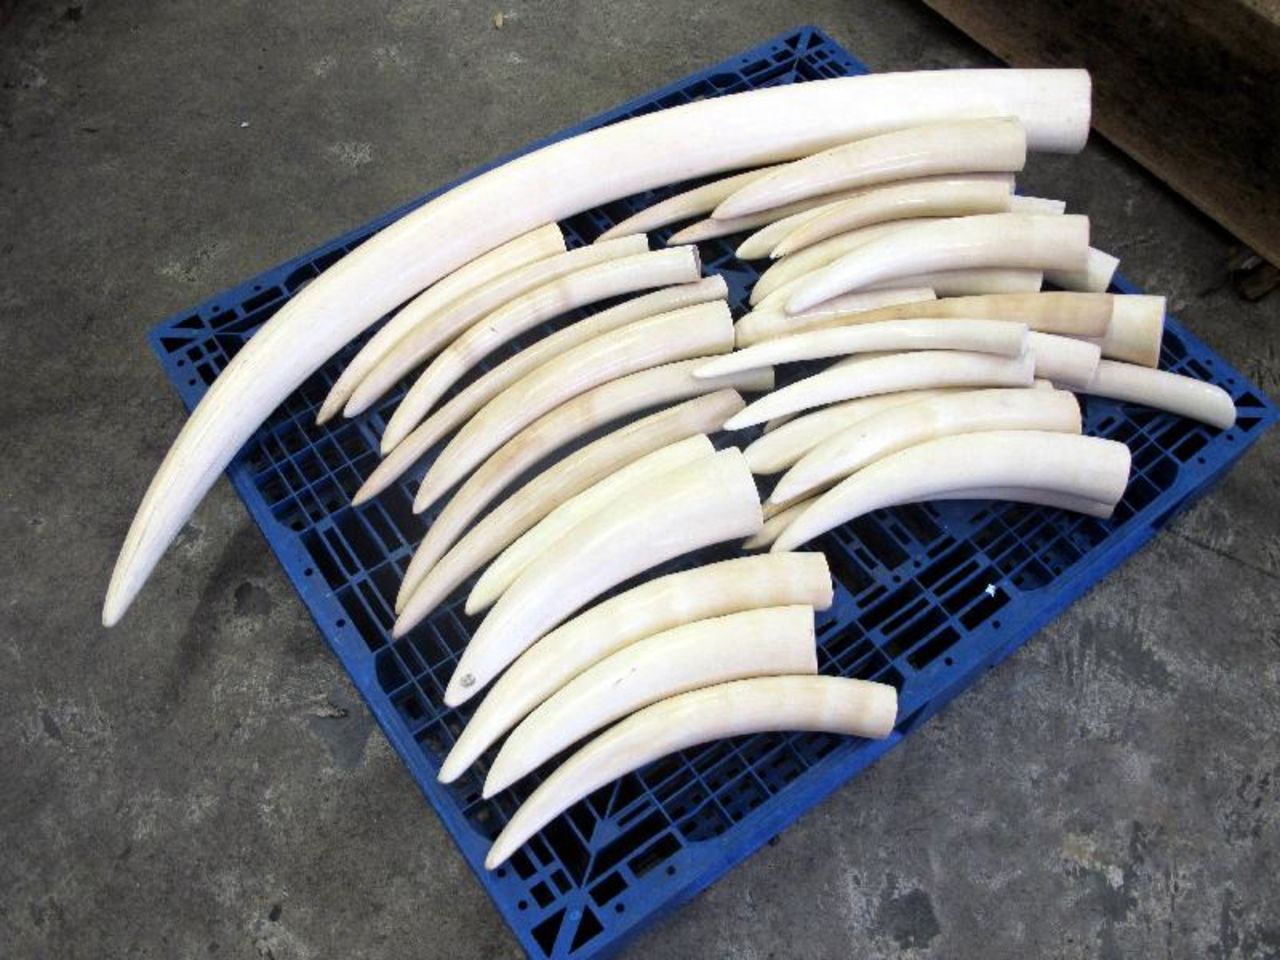 Hong Kong customs officials seized 1,120 ivory tusks in a container shipped from Nigeria on August 6, 2013. 